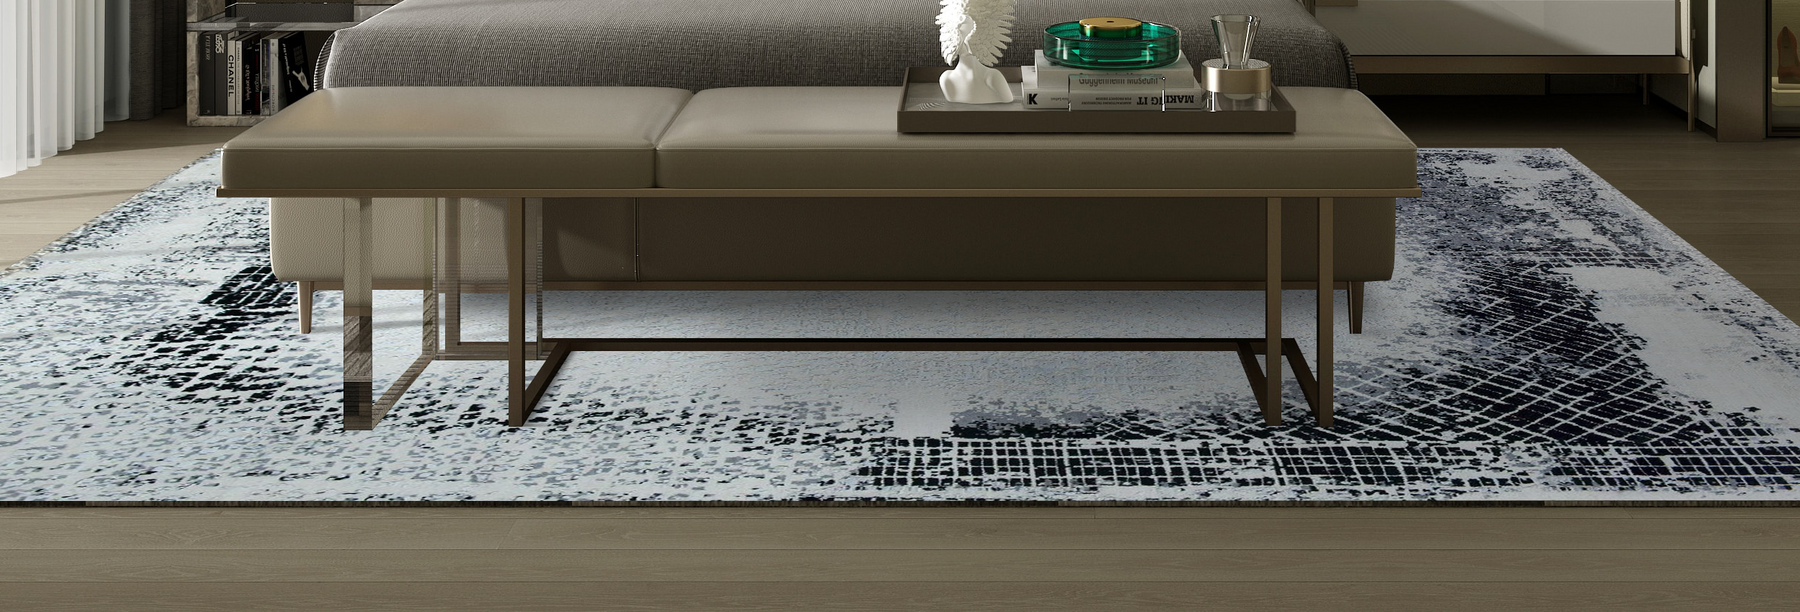 Part Two: Rug Appeal -  Exploring the Benefits of Owning a Designer Rug - Do You Really Need One?